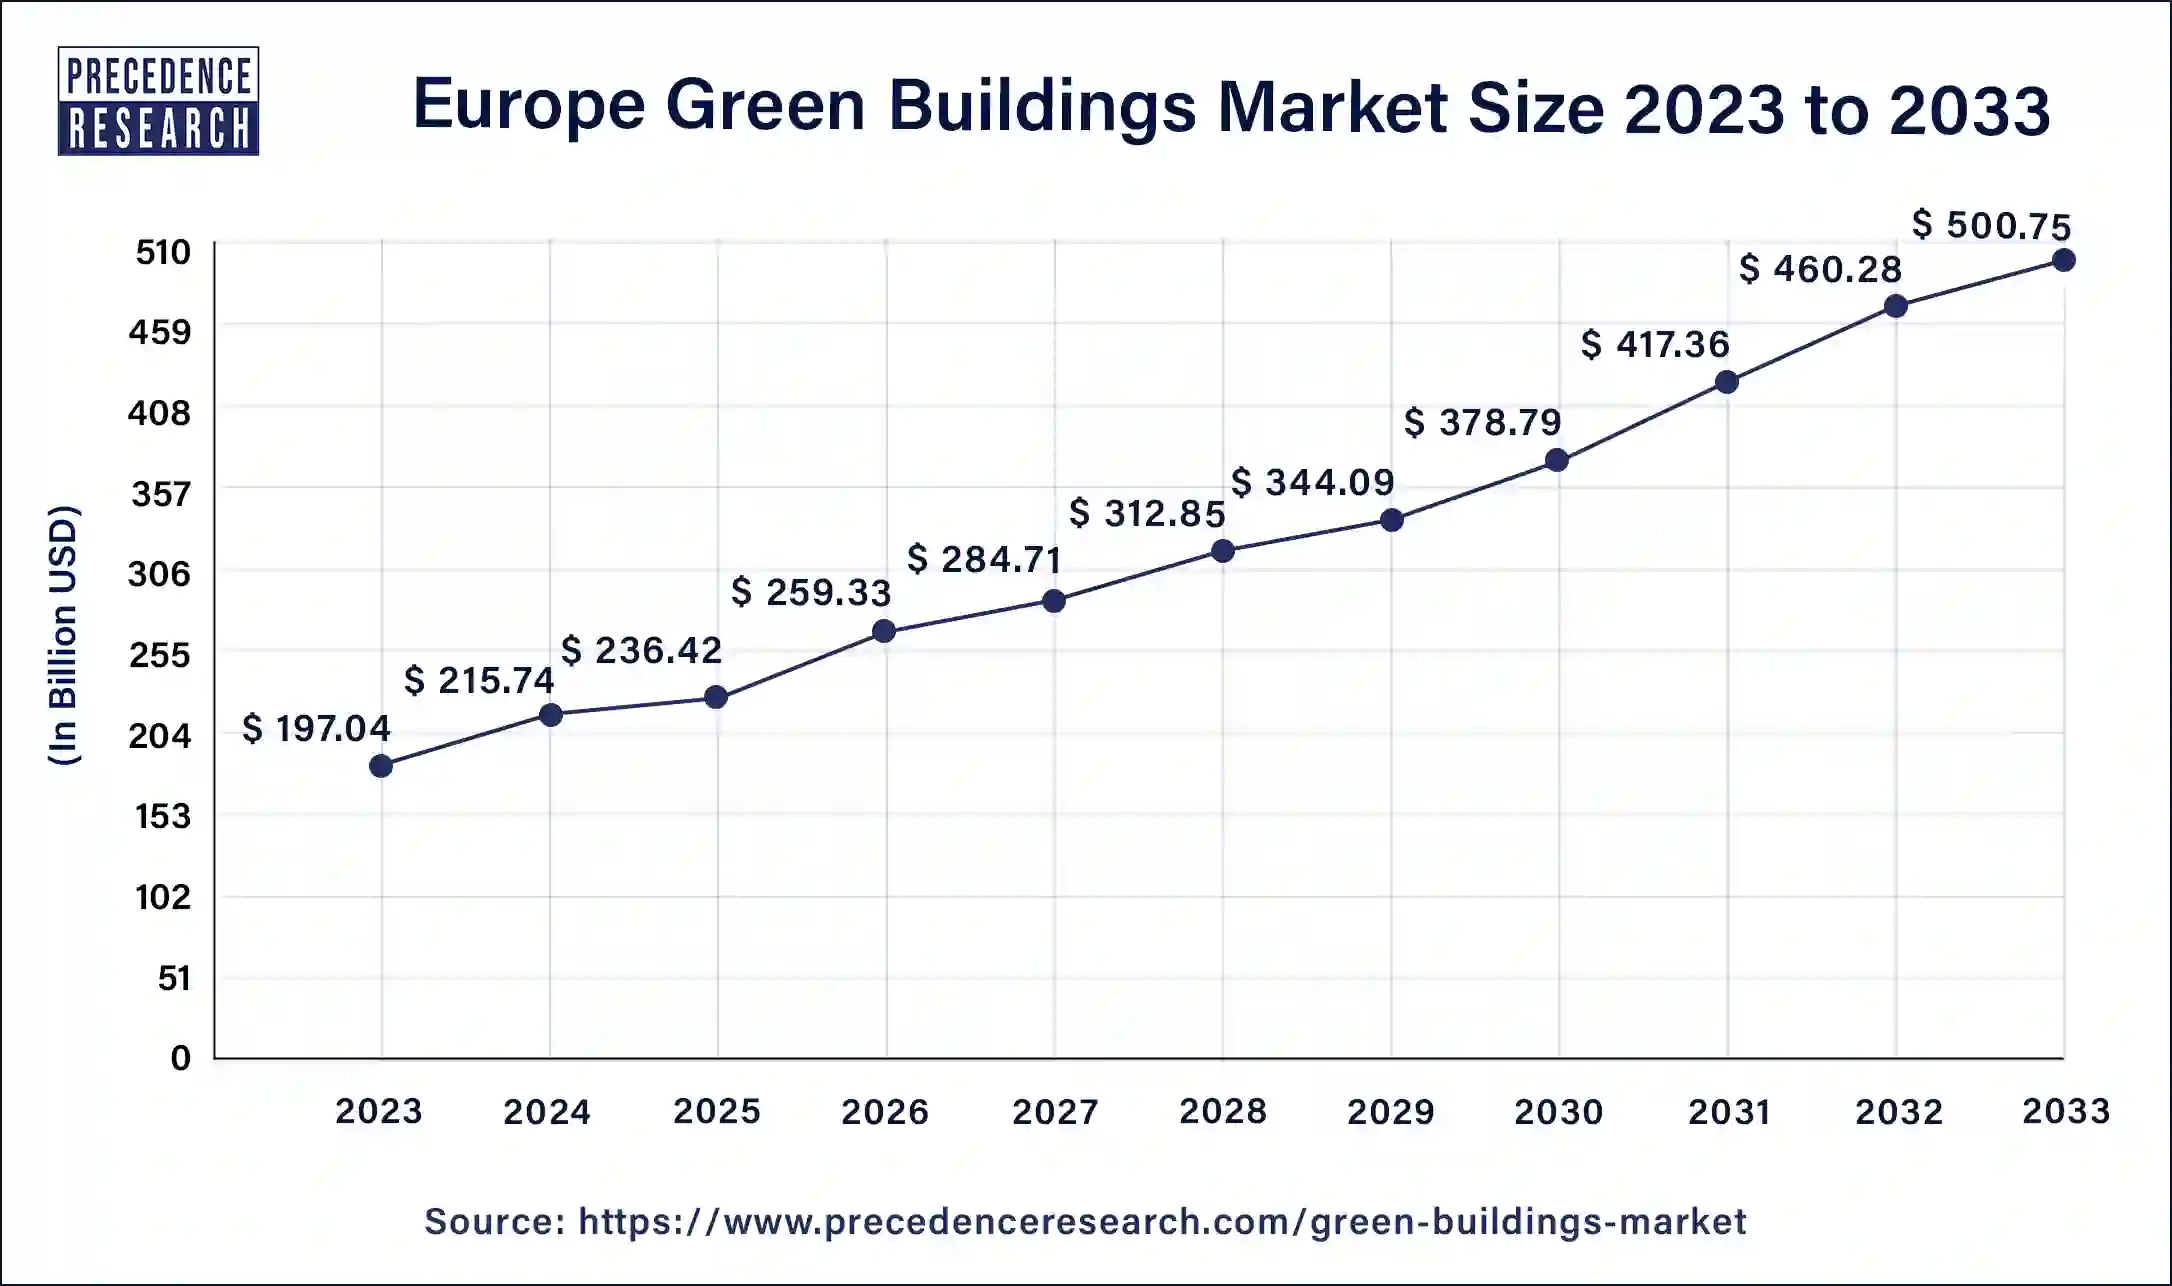 Europe Green Buildings Market Size 2024 to 2033